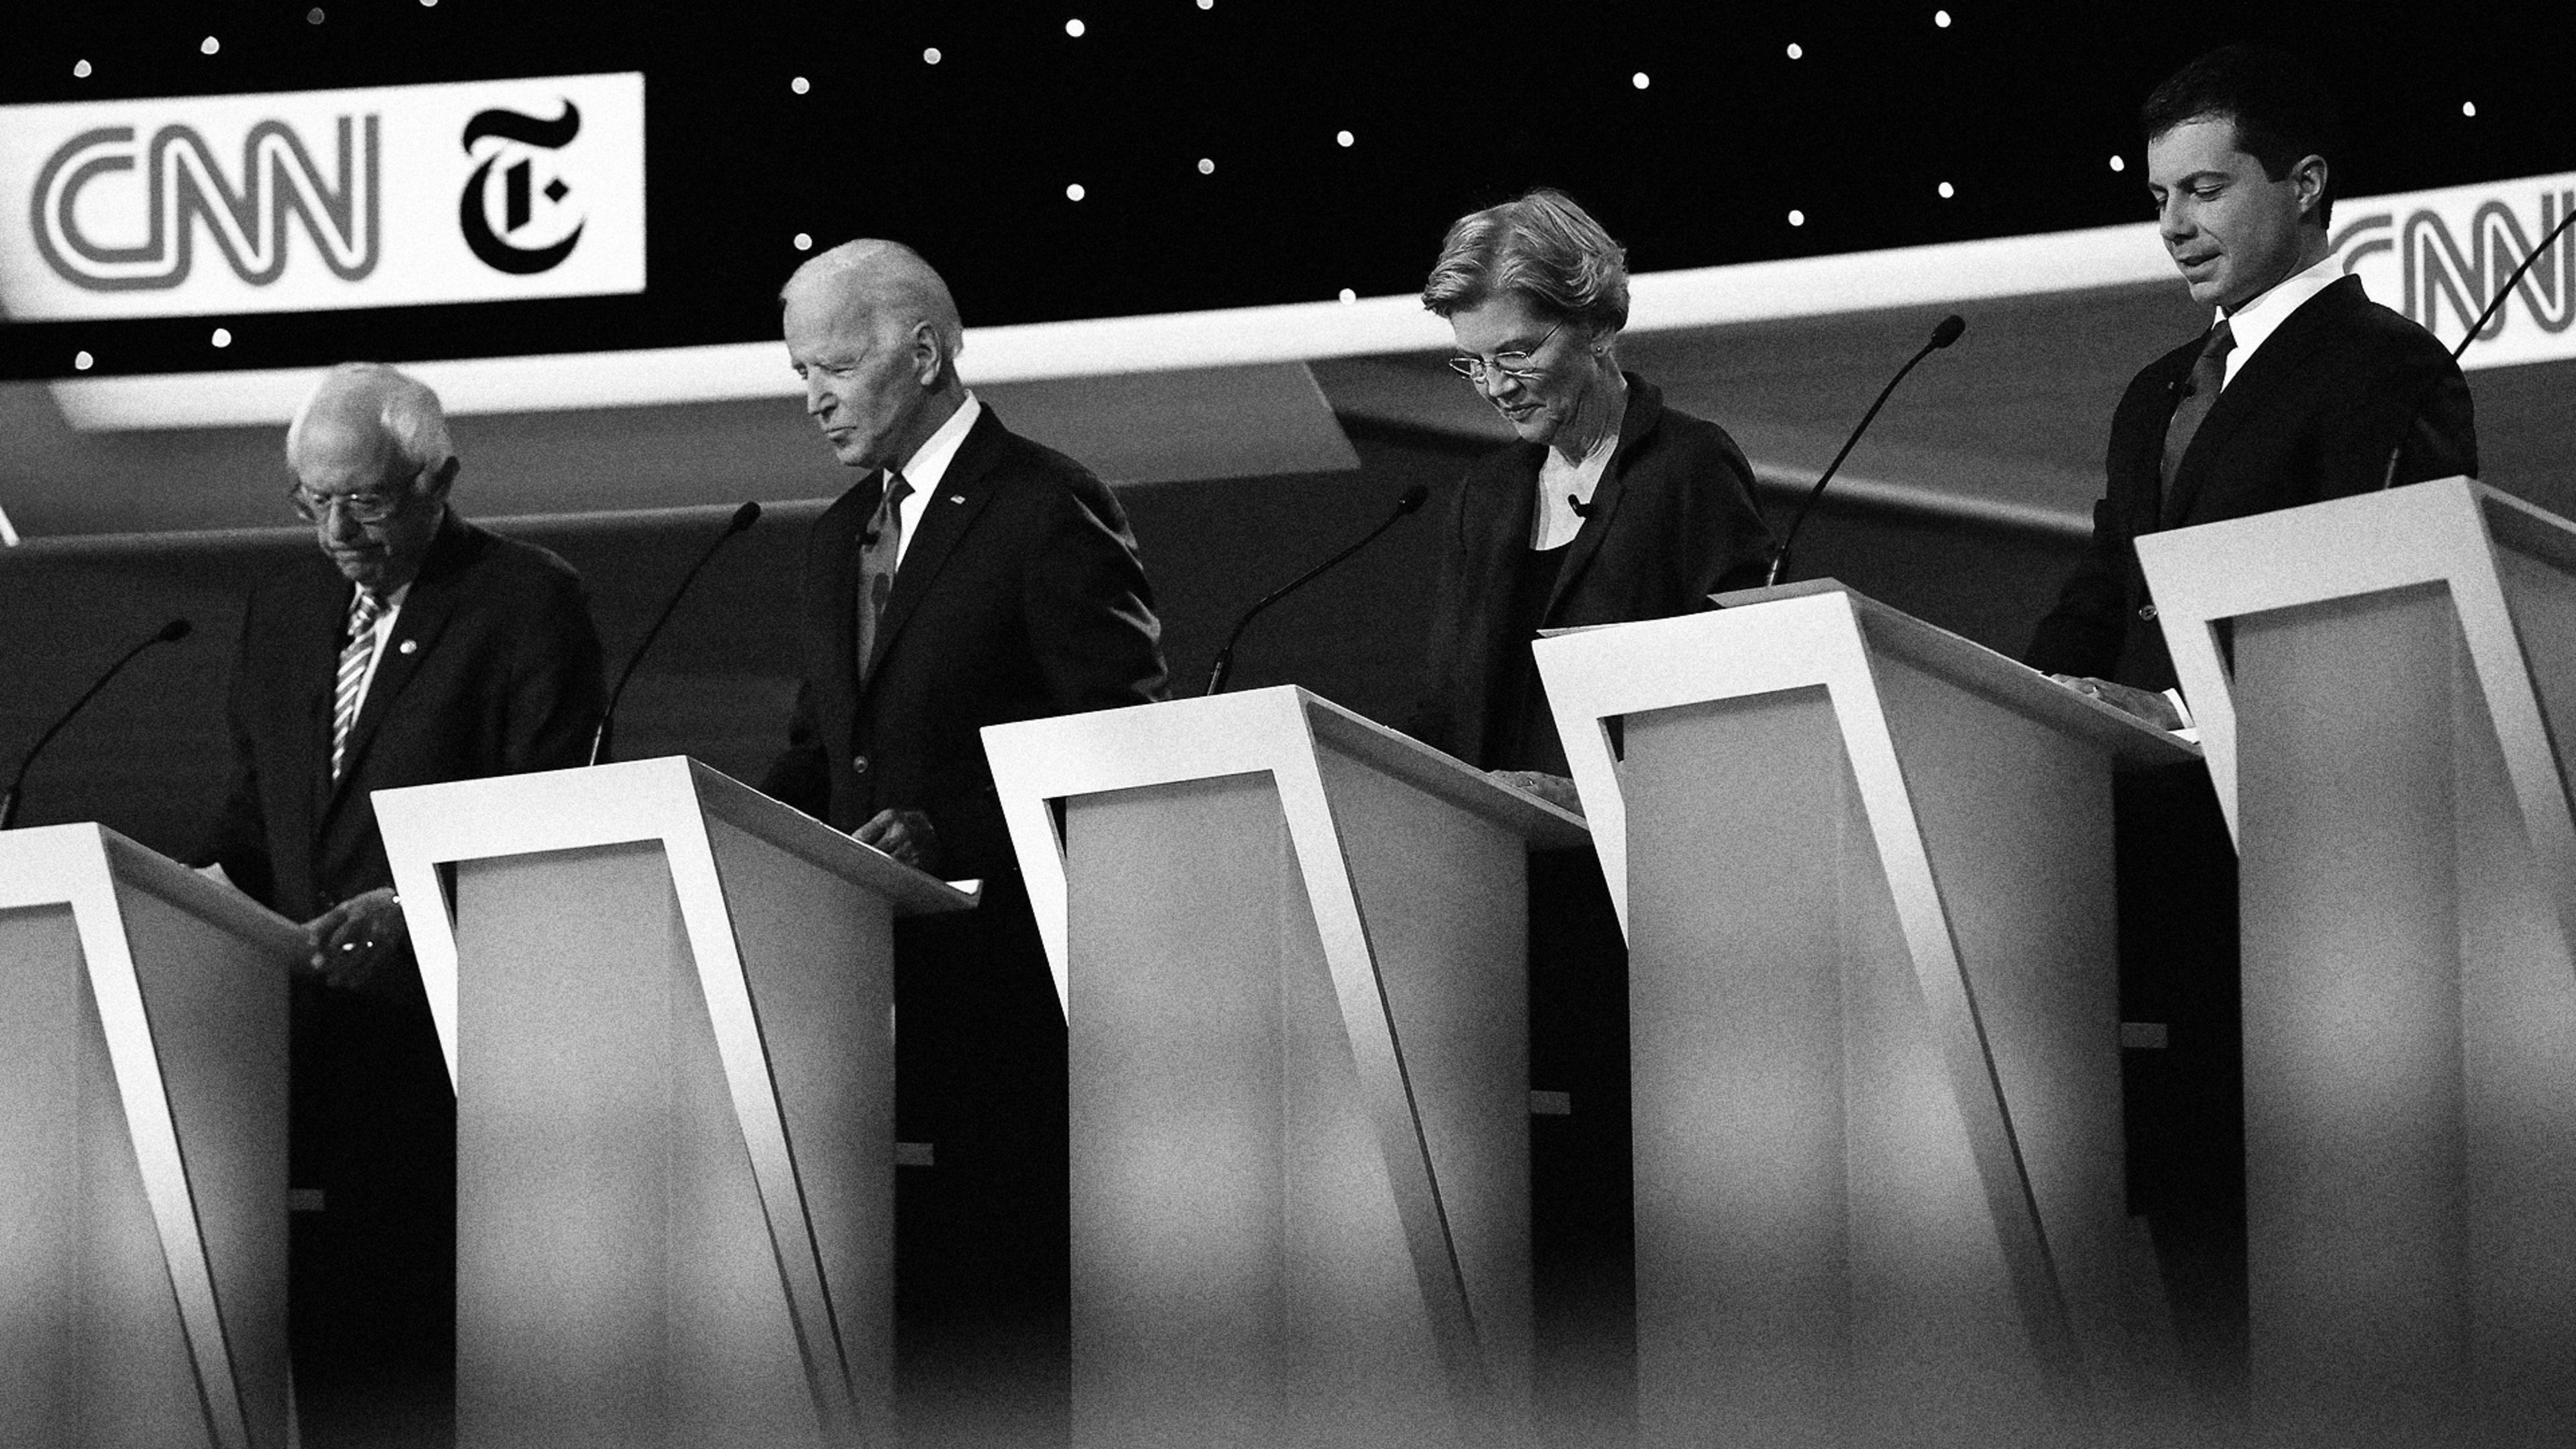 How to watch the 2020 Democratic debate on PBS or CNN without cable